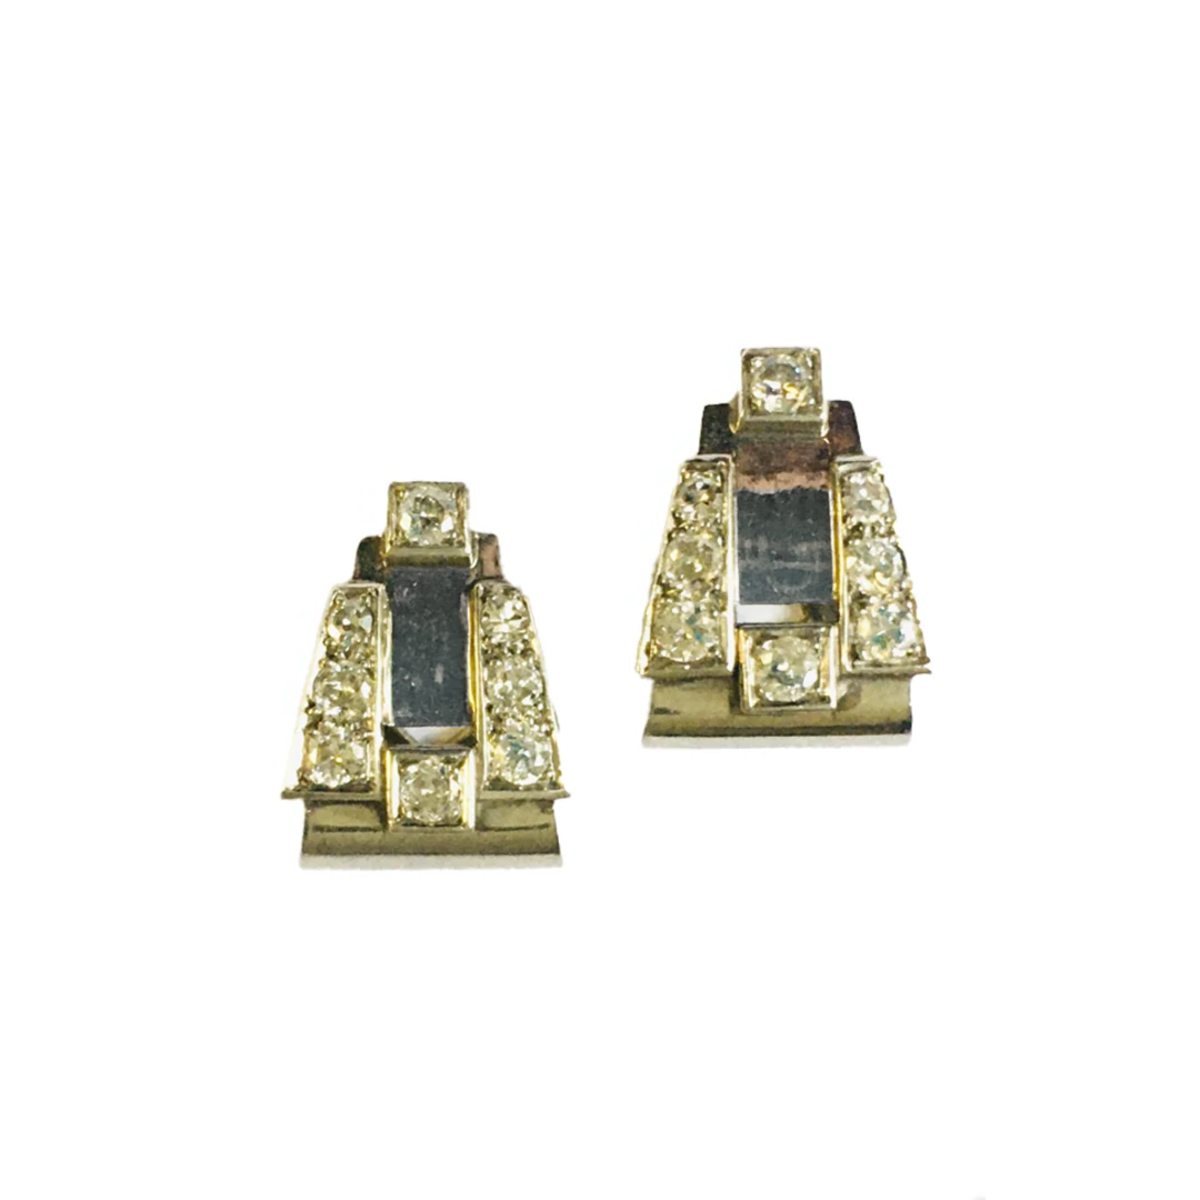 French 1930s Platinum & 18KT Yellow Gold Diamond Earrings front